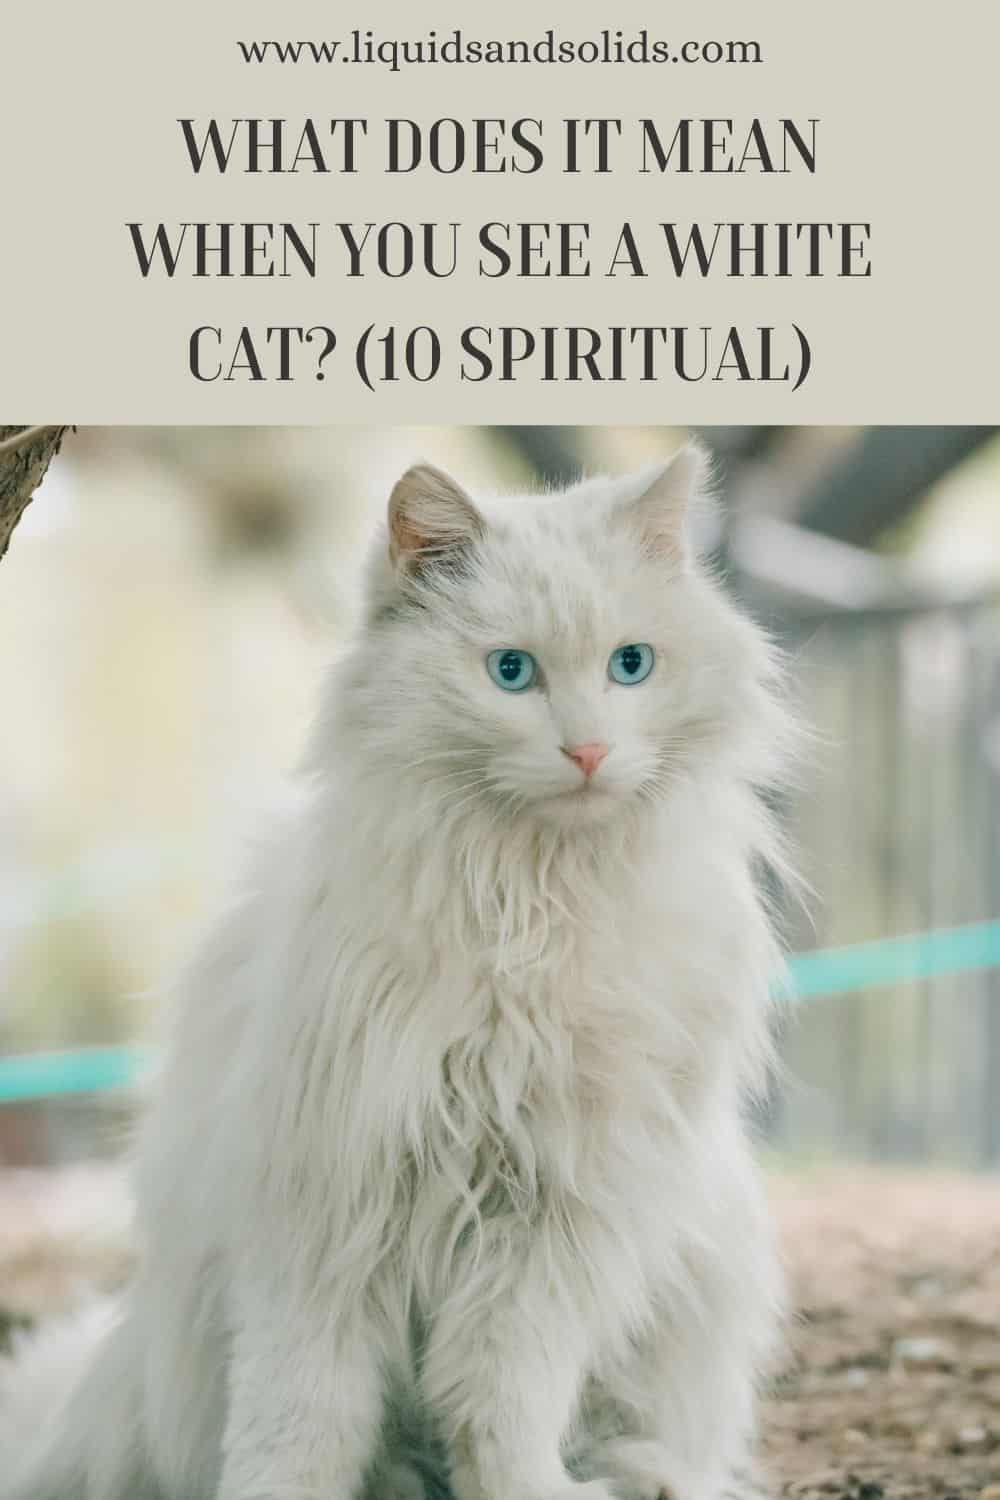 What Does It Mean When You See A White Cat? (10 Spiritual)